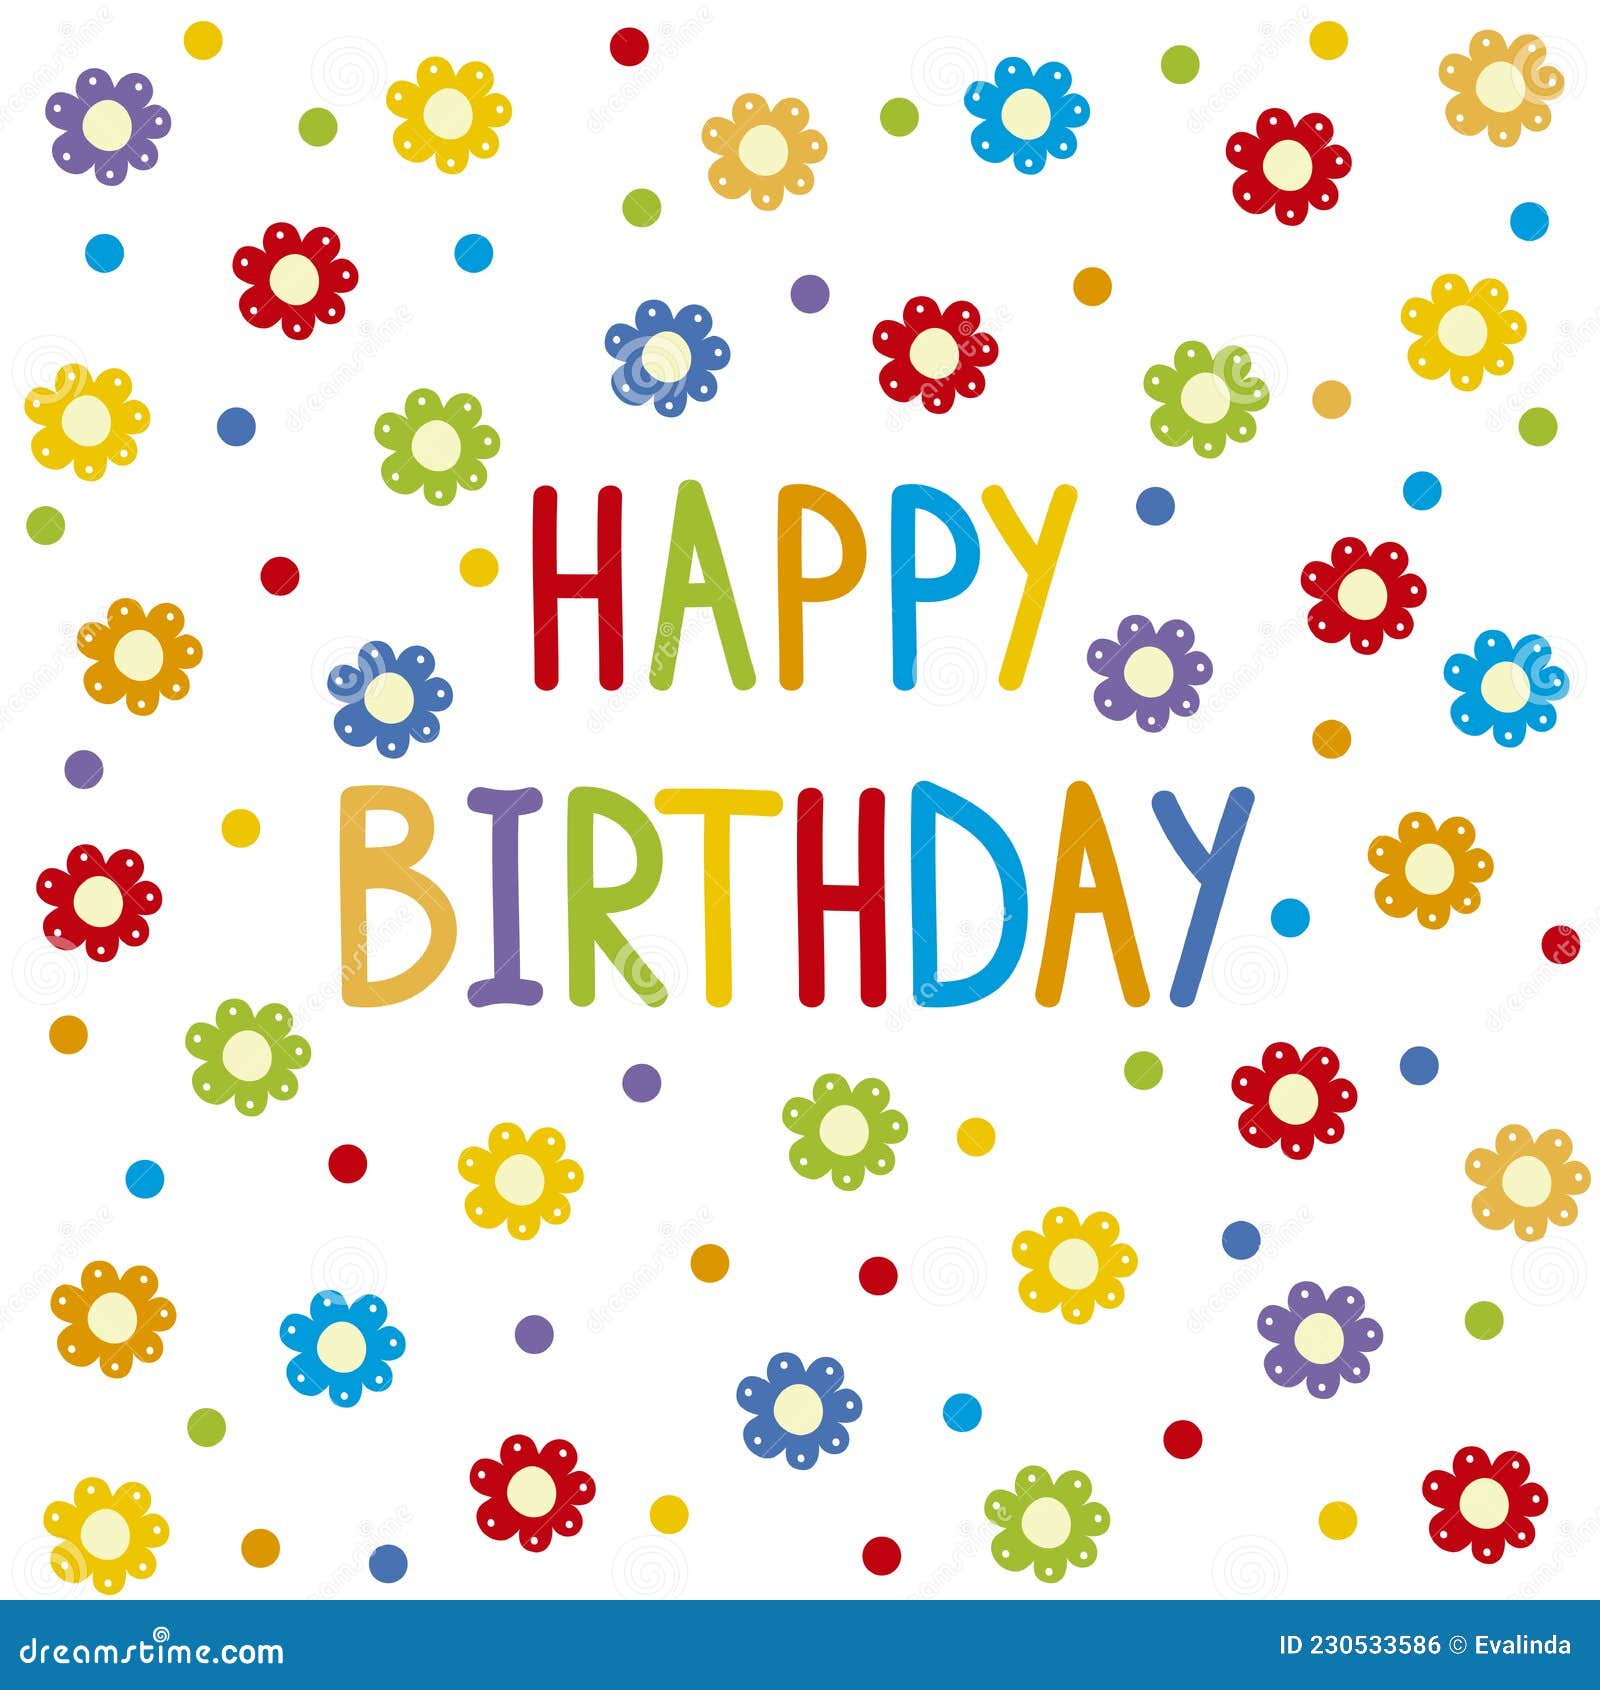 Happy Birthday Greeting Card with Flowers. Stock Vector - Illustration ...